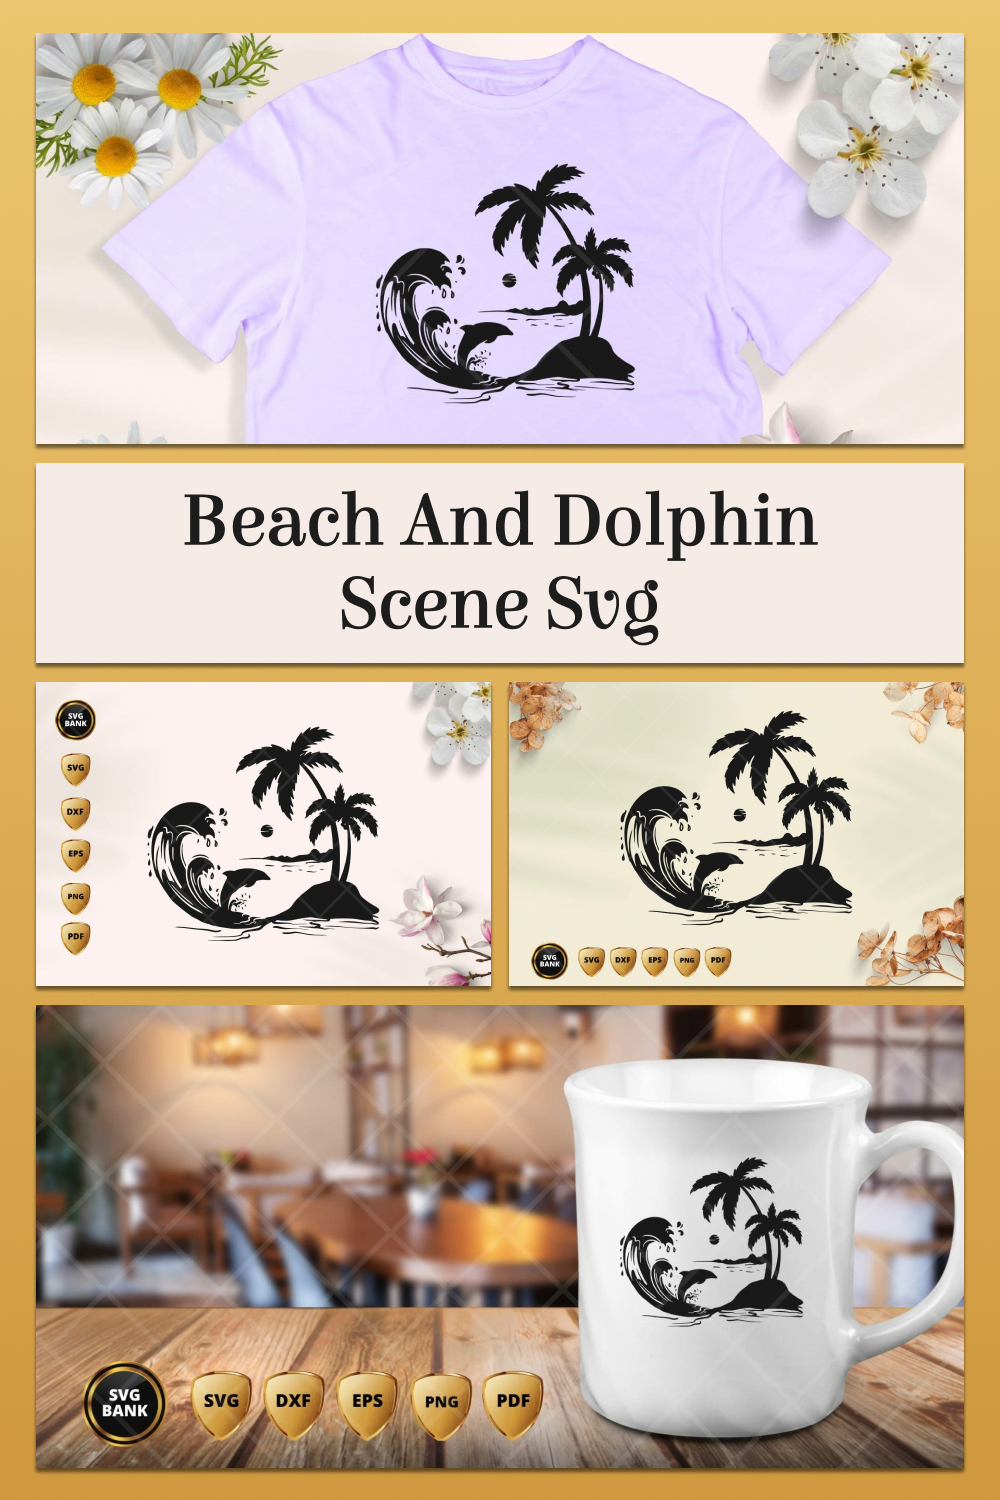 Screen shot of the beach and dolphin scene svg.